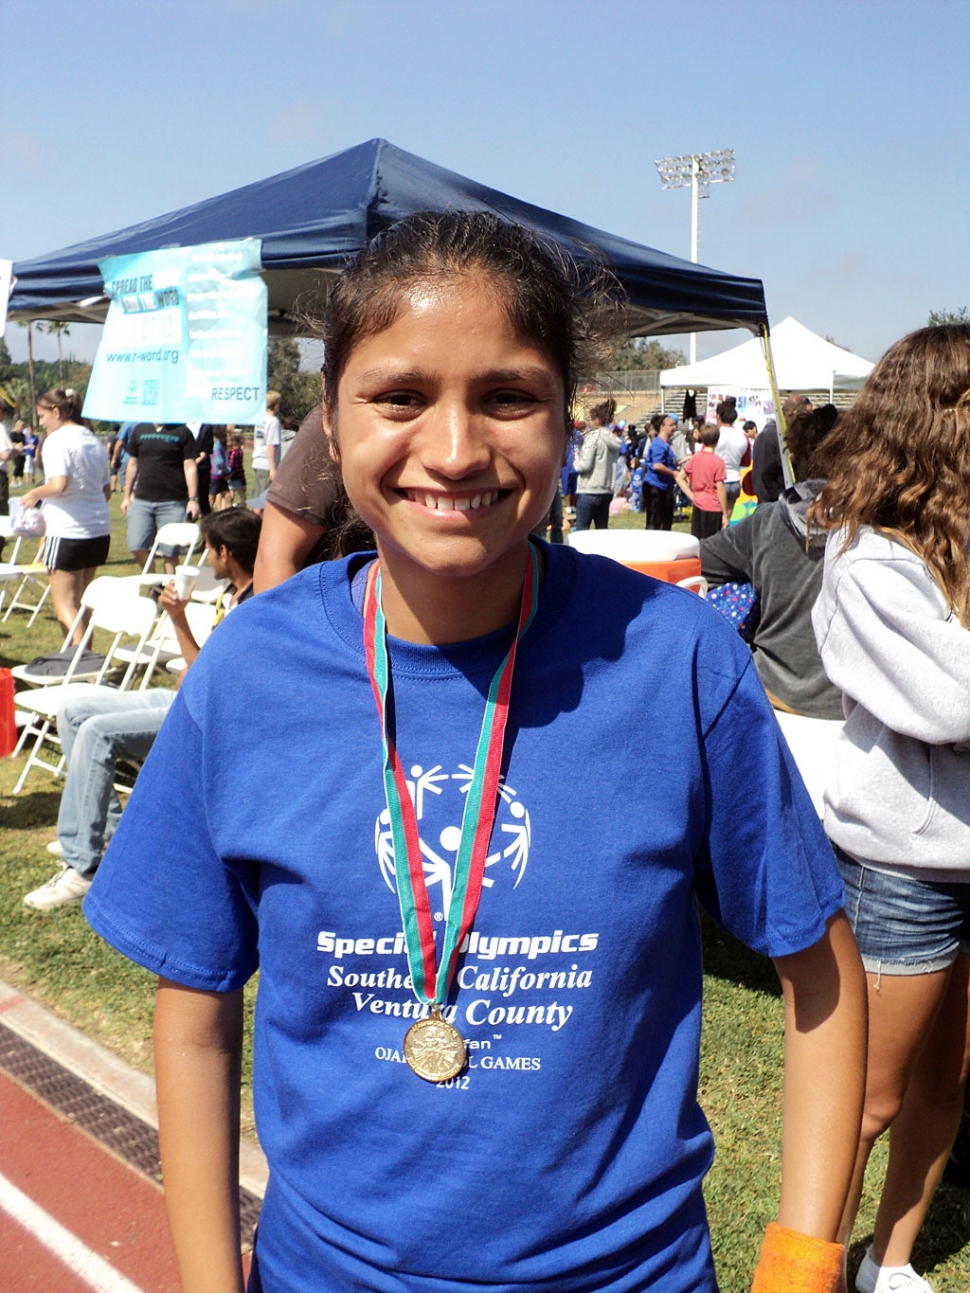 On June 9 & 10th at Long Beach University, the 2012 Special Olympics Summer Games were held. (Above) Anna Maldonado, 18 of Fillmore, participated in the event. Maldonado brought home three gold medals (1500 M Run, 800 M Run, and Long Jump). In May, Maldanado participated in three other events, held in La Crecenta, Agoura, and William S. Hart, bringing home three gold medals in each heat.